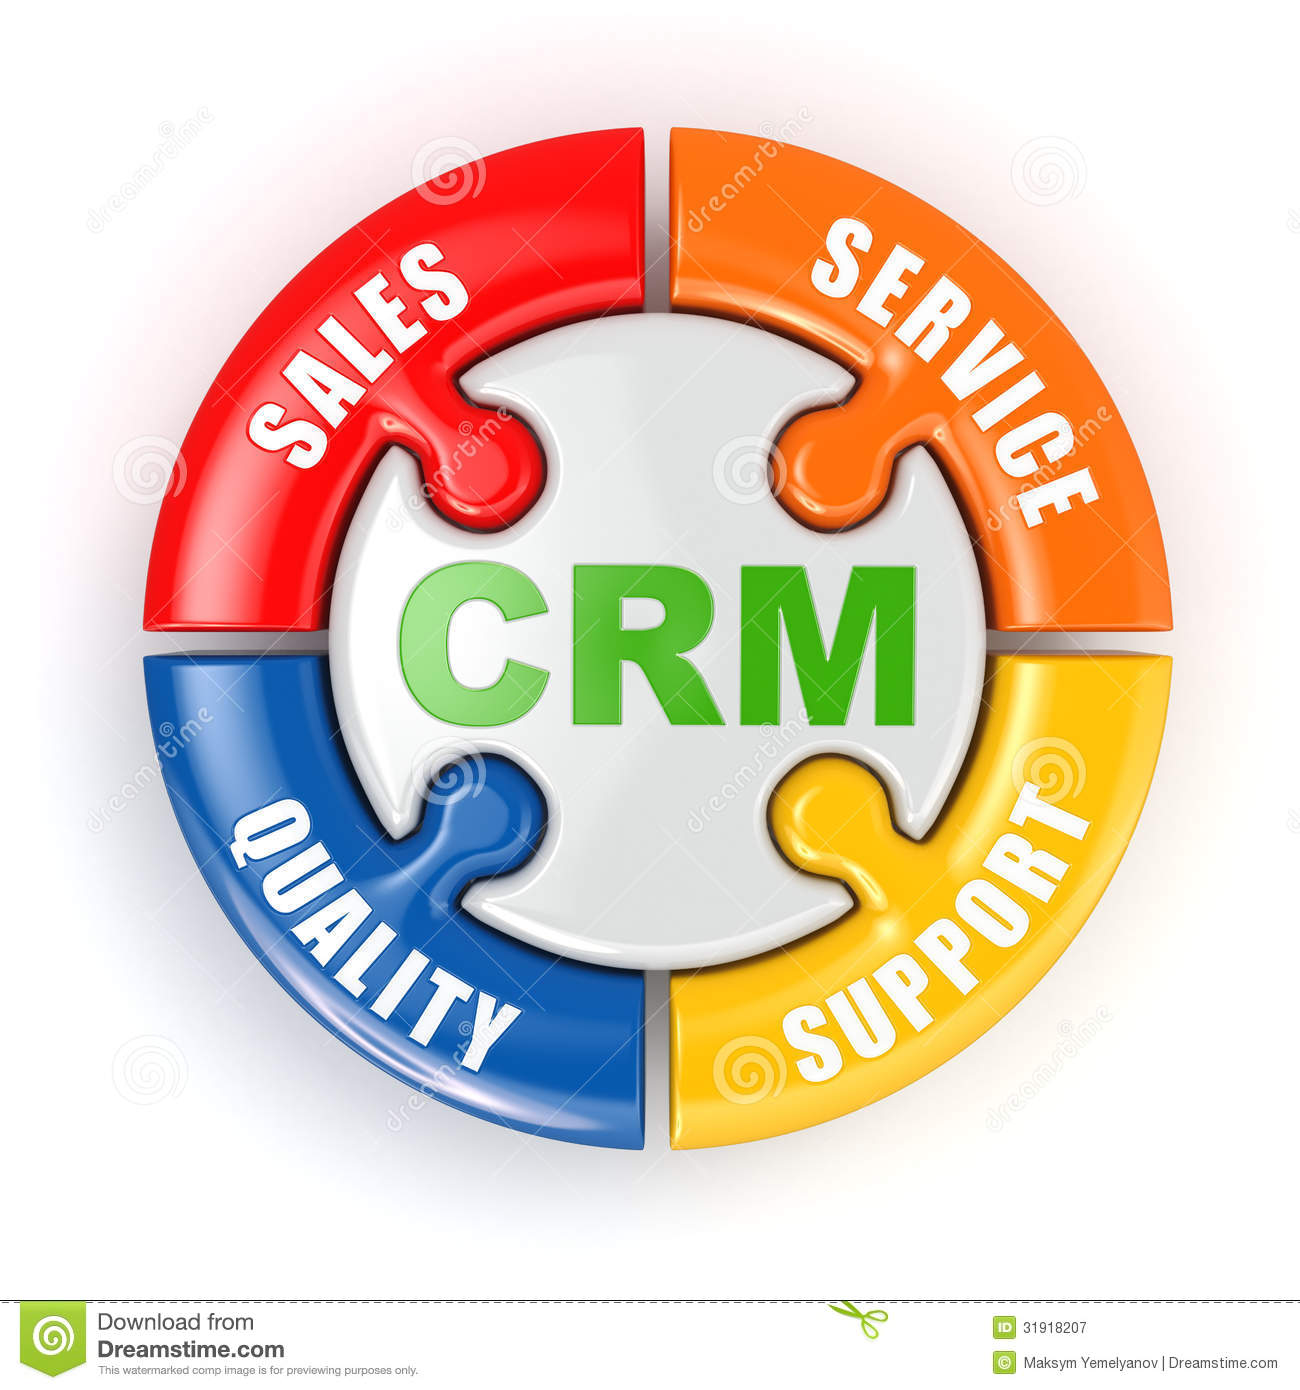 Crm  Customer Relationship Marketing Concept  Royalty Free Stock